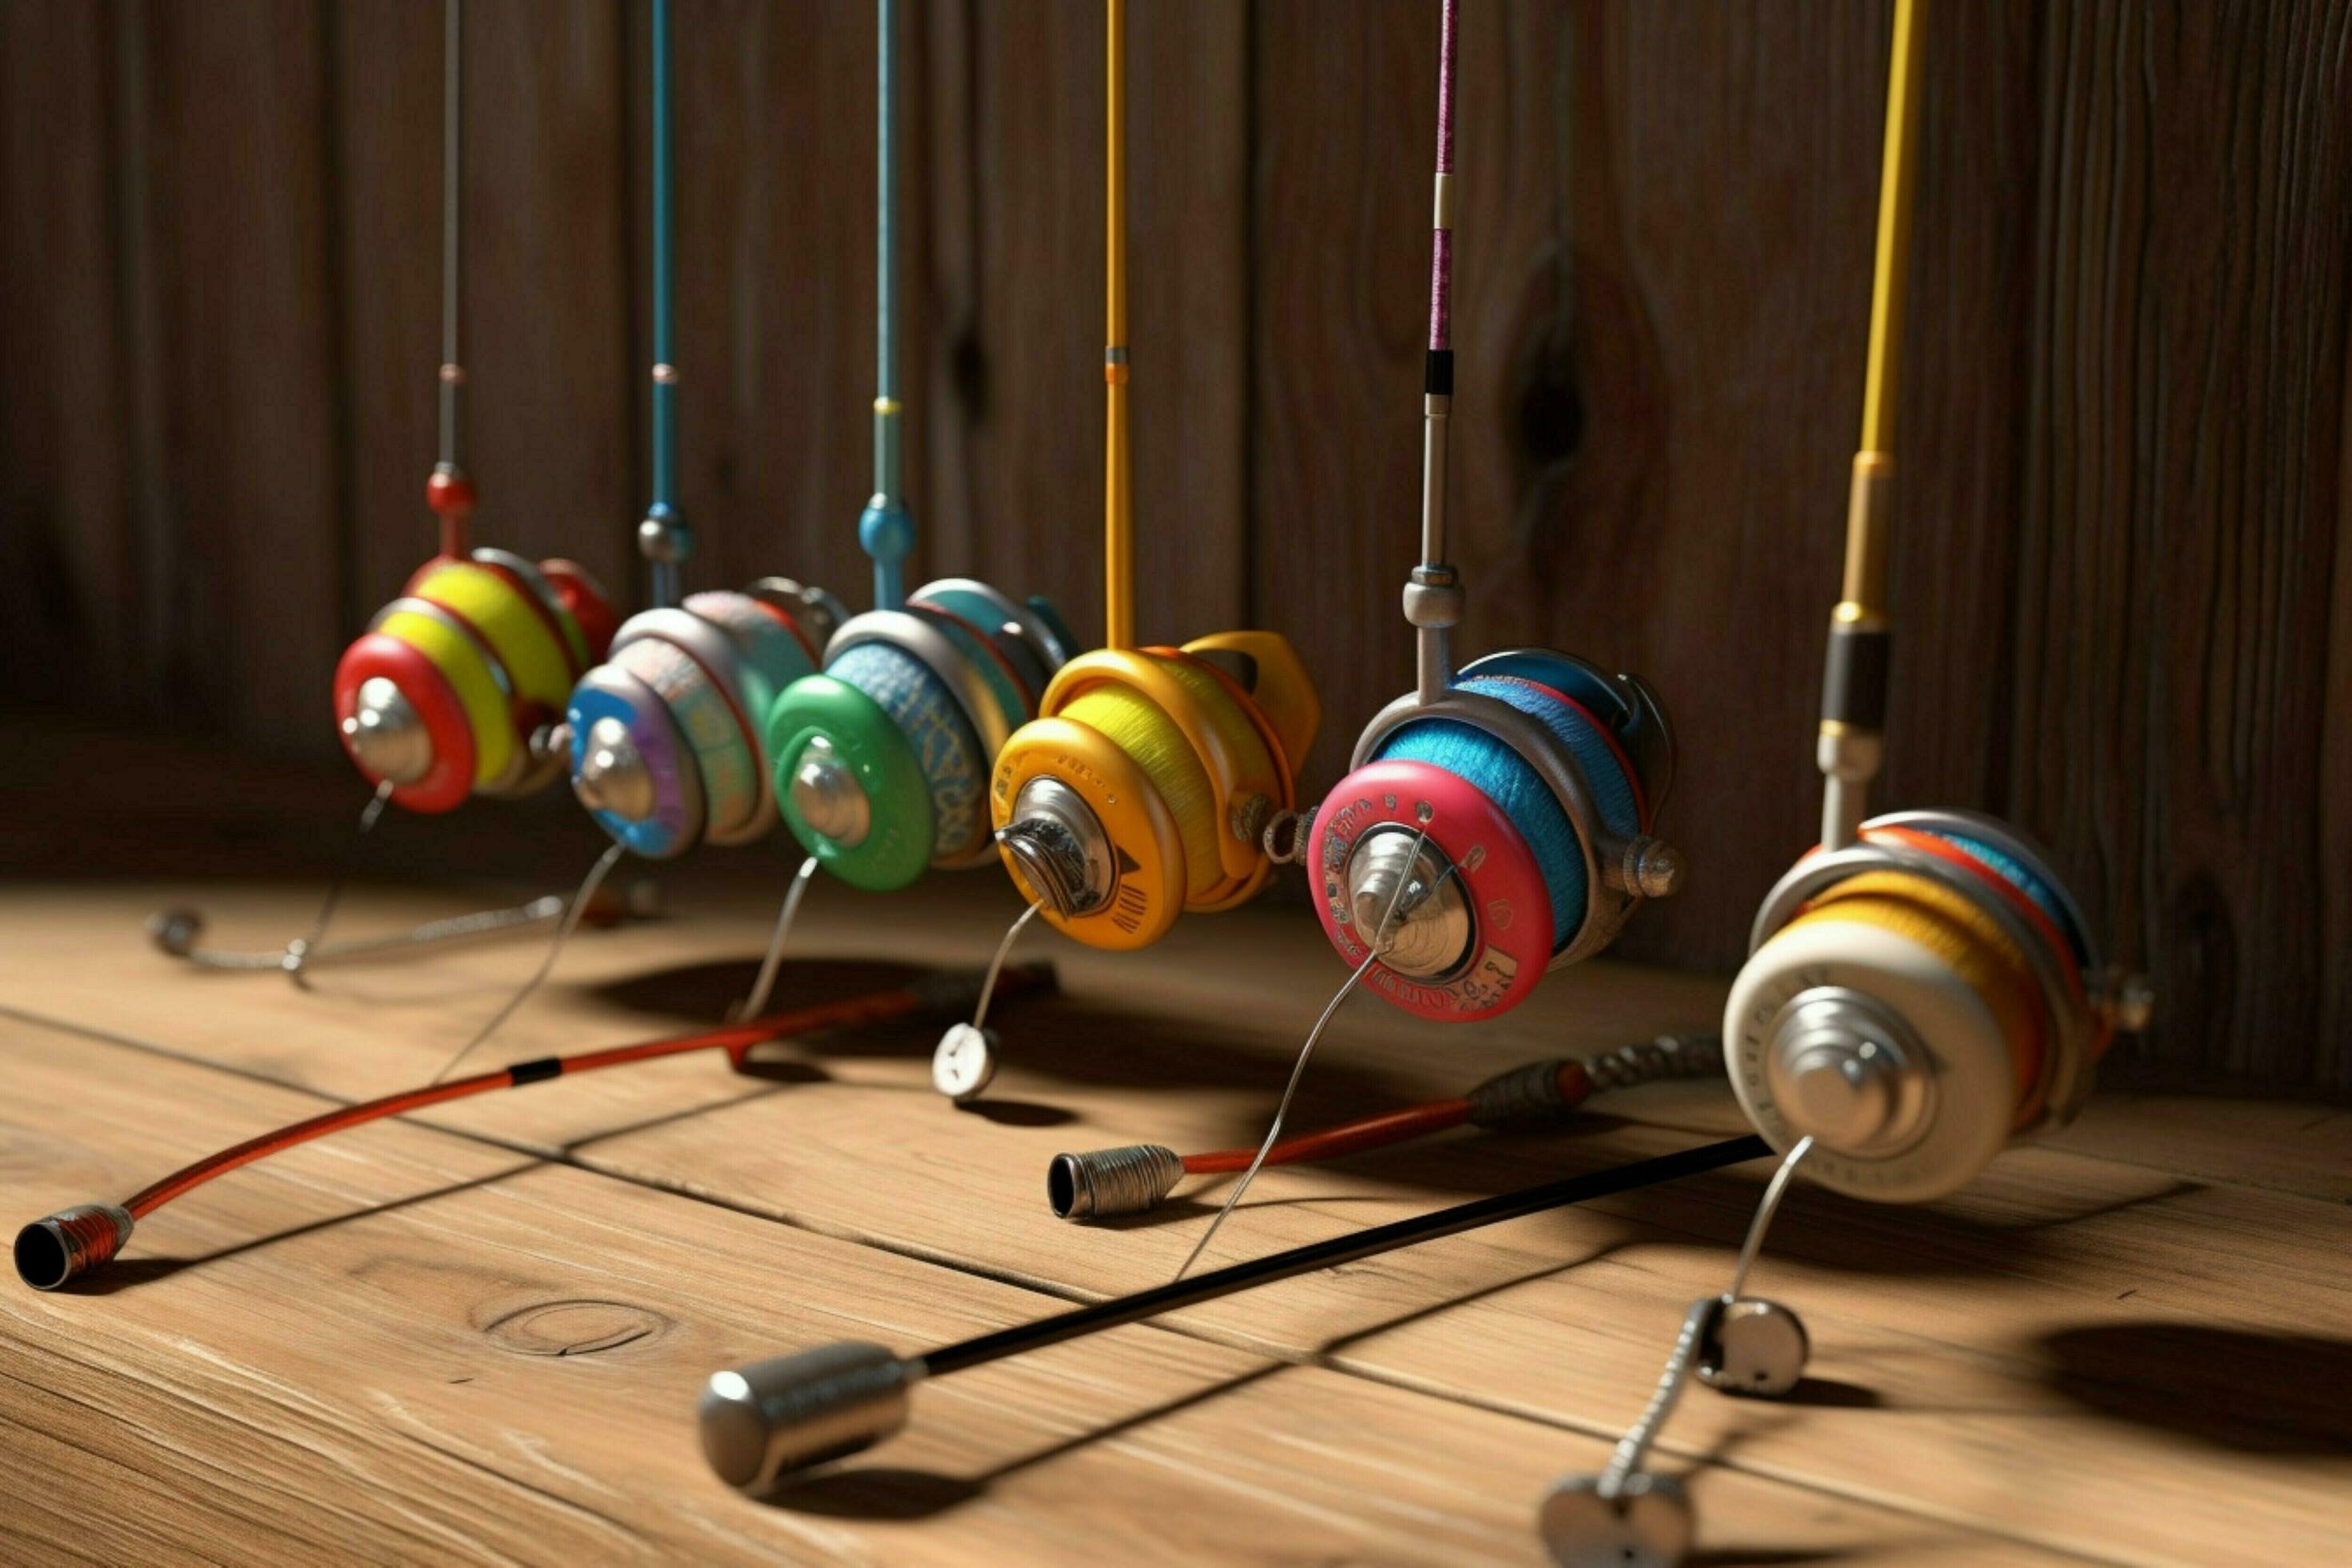 https://static.vecteezy.com/system/resources/previews/030/623/543/large_2x/a-set-of-toy-fishing-poles-for-kids-free-photo.jpg